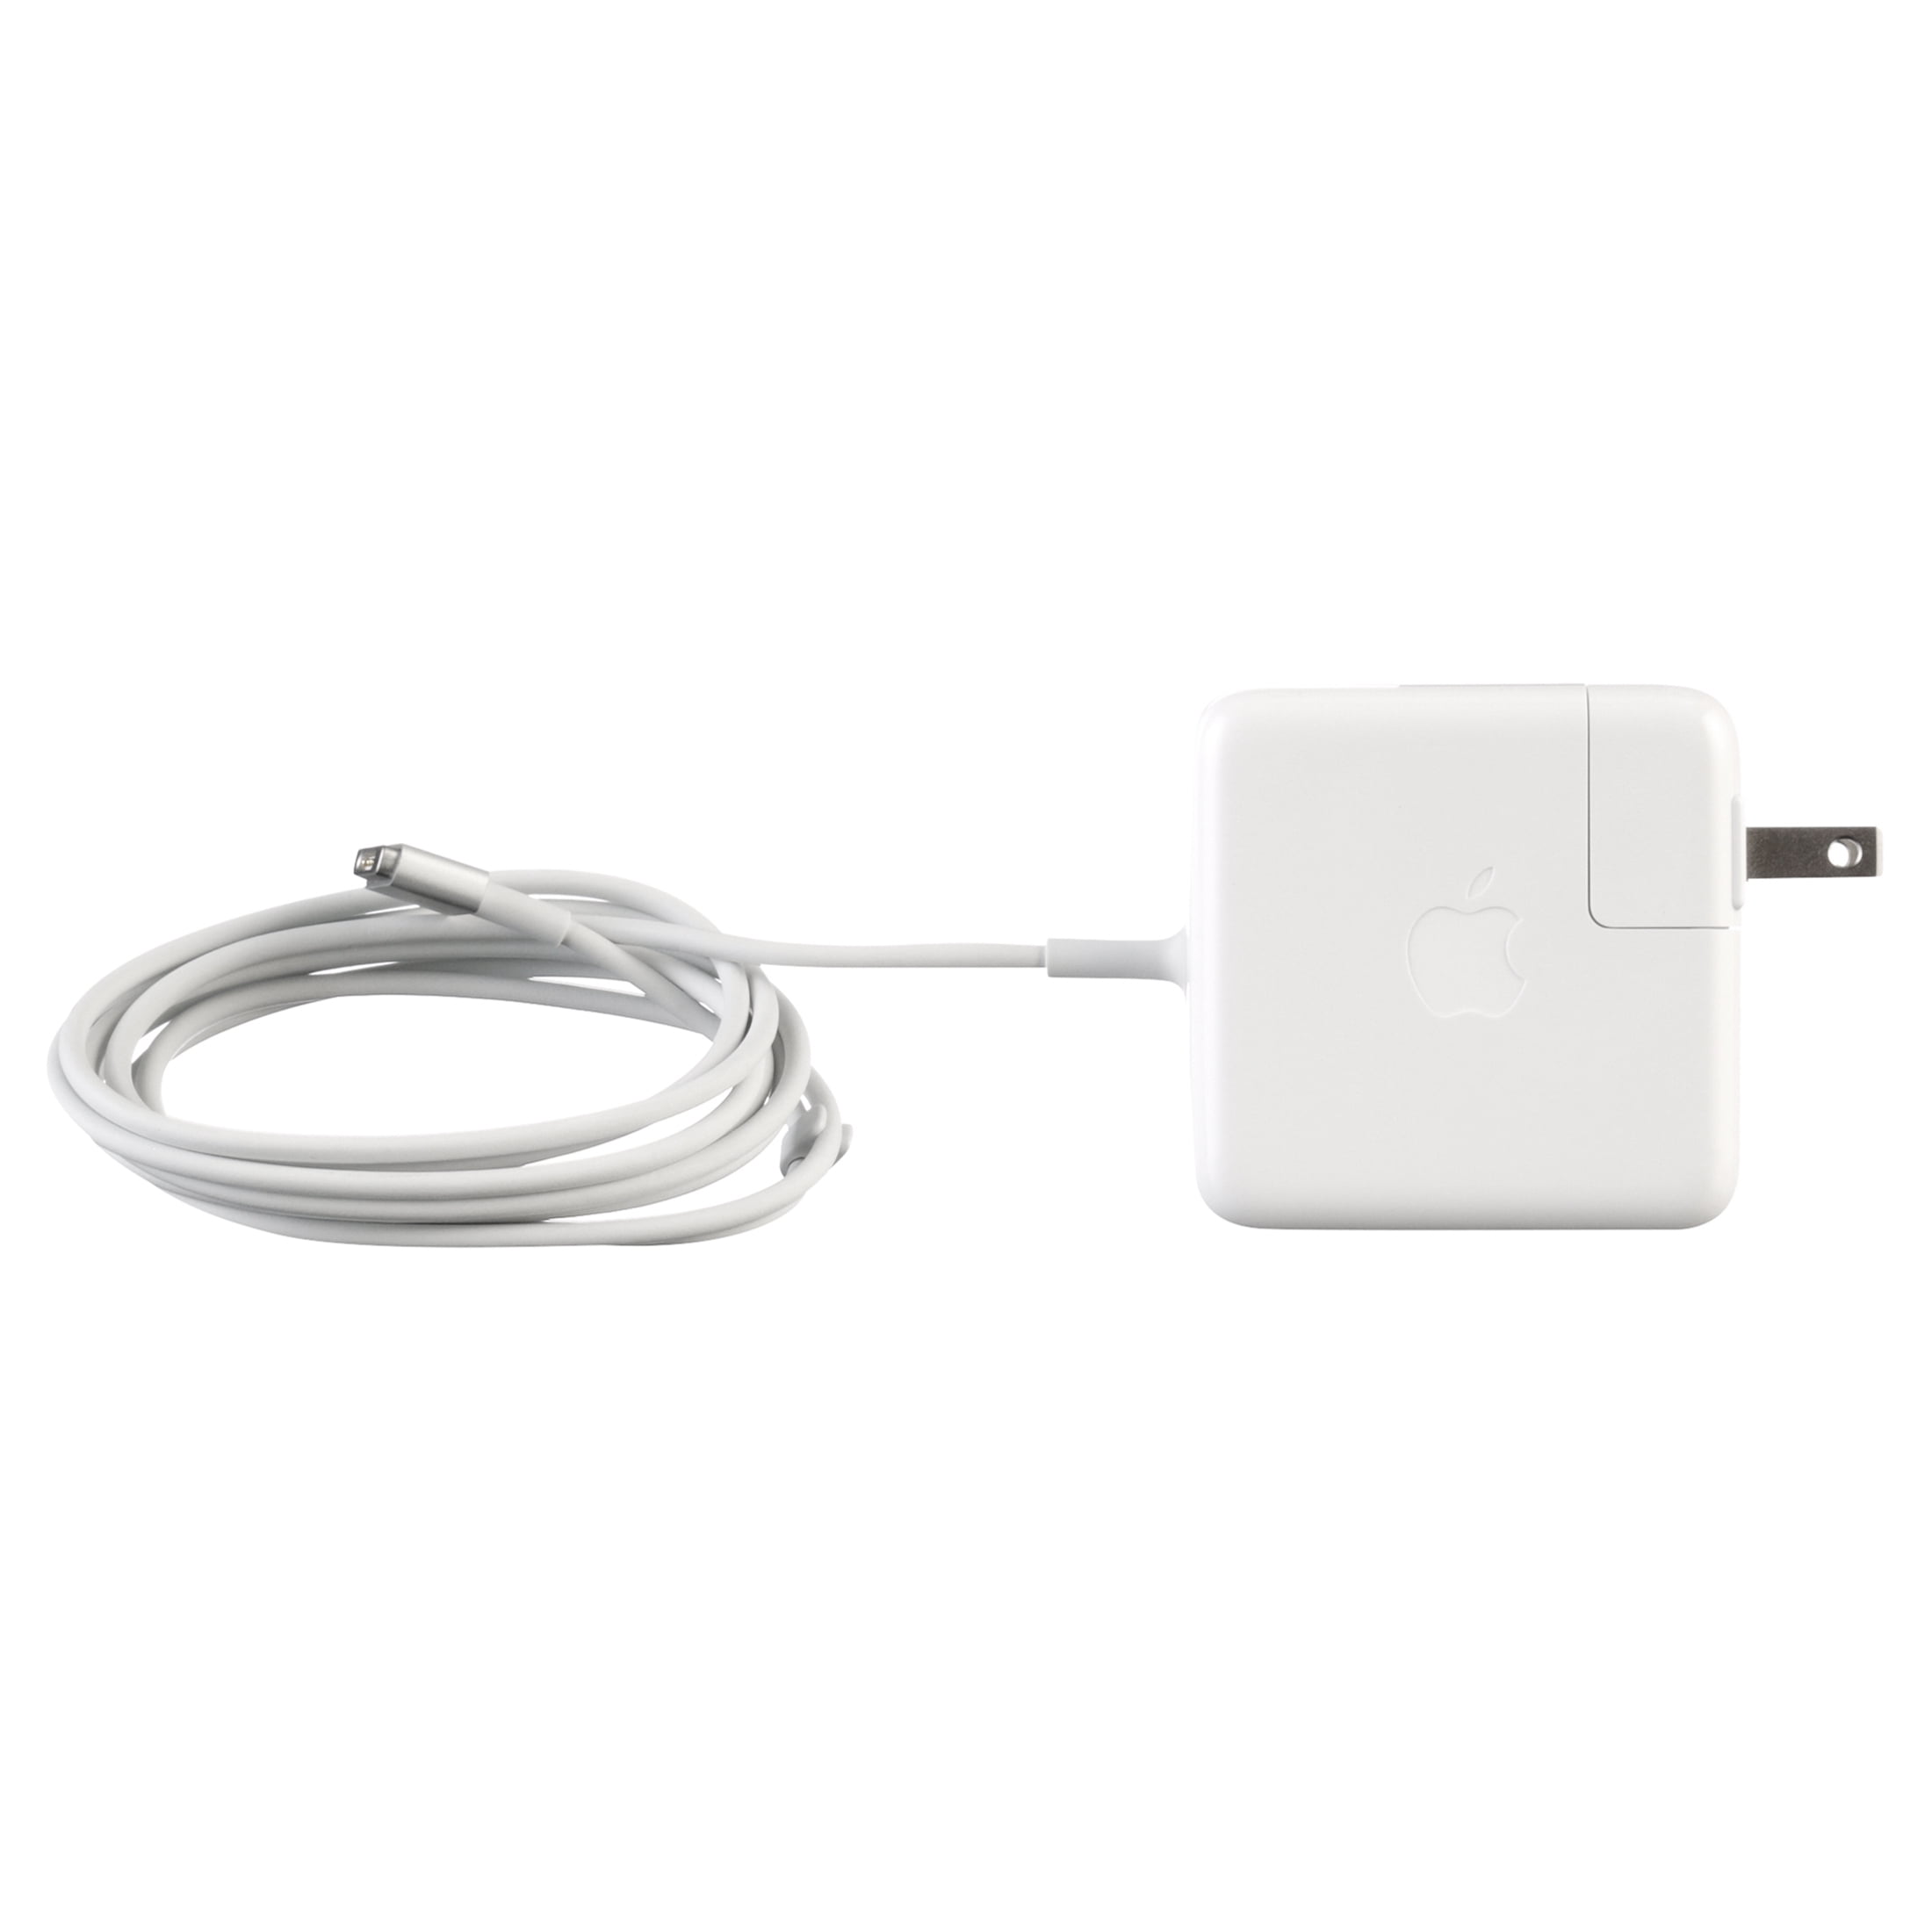 Apple 45W MagSafe 2 Power Adapter (for MacBook Air) openbox, White